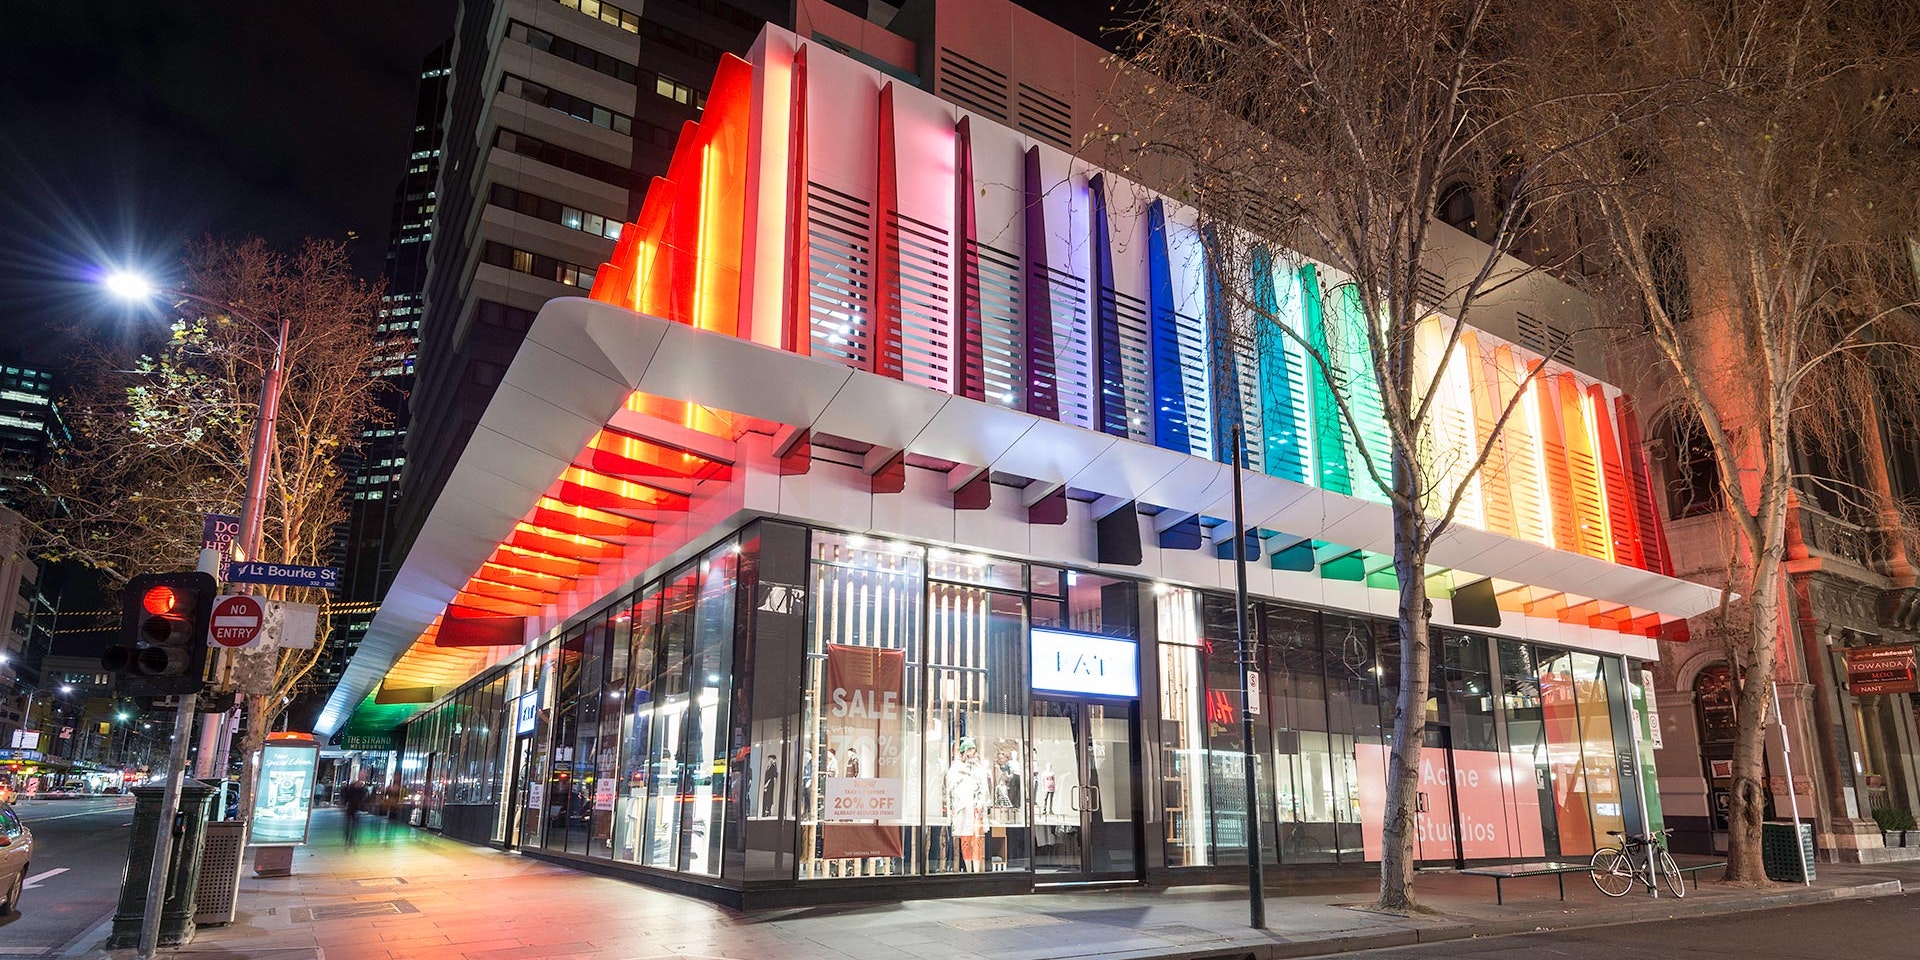 Maxis high-power linear flood light  in application, installed on the Strad Facade in Melbourne CBD. Every second coloured panel is illuminated by a Maxis high-power luminaire.